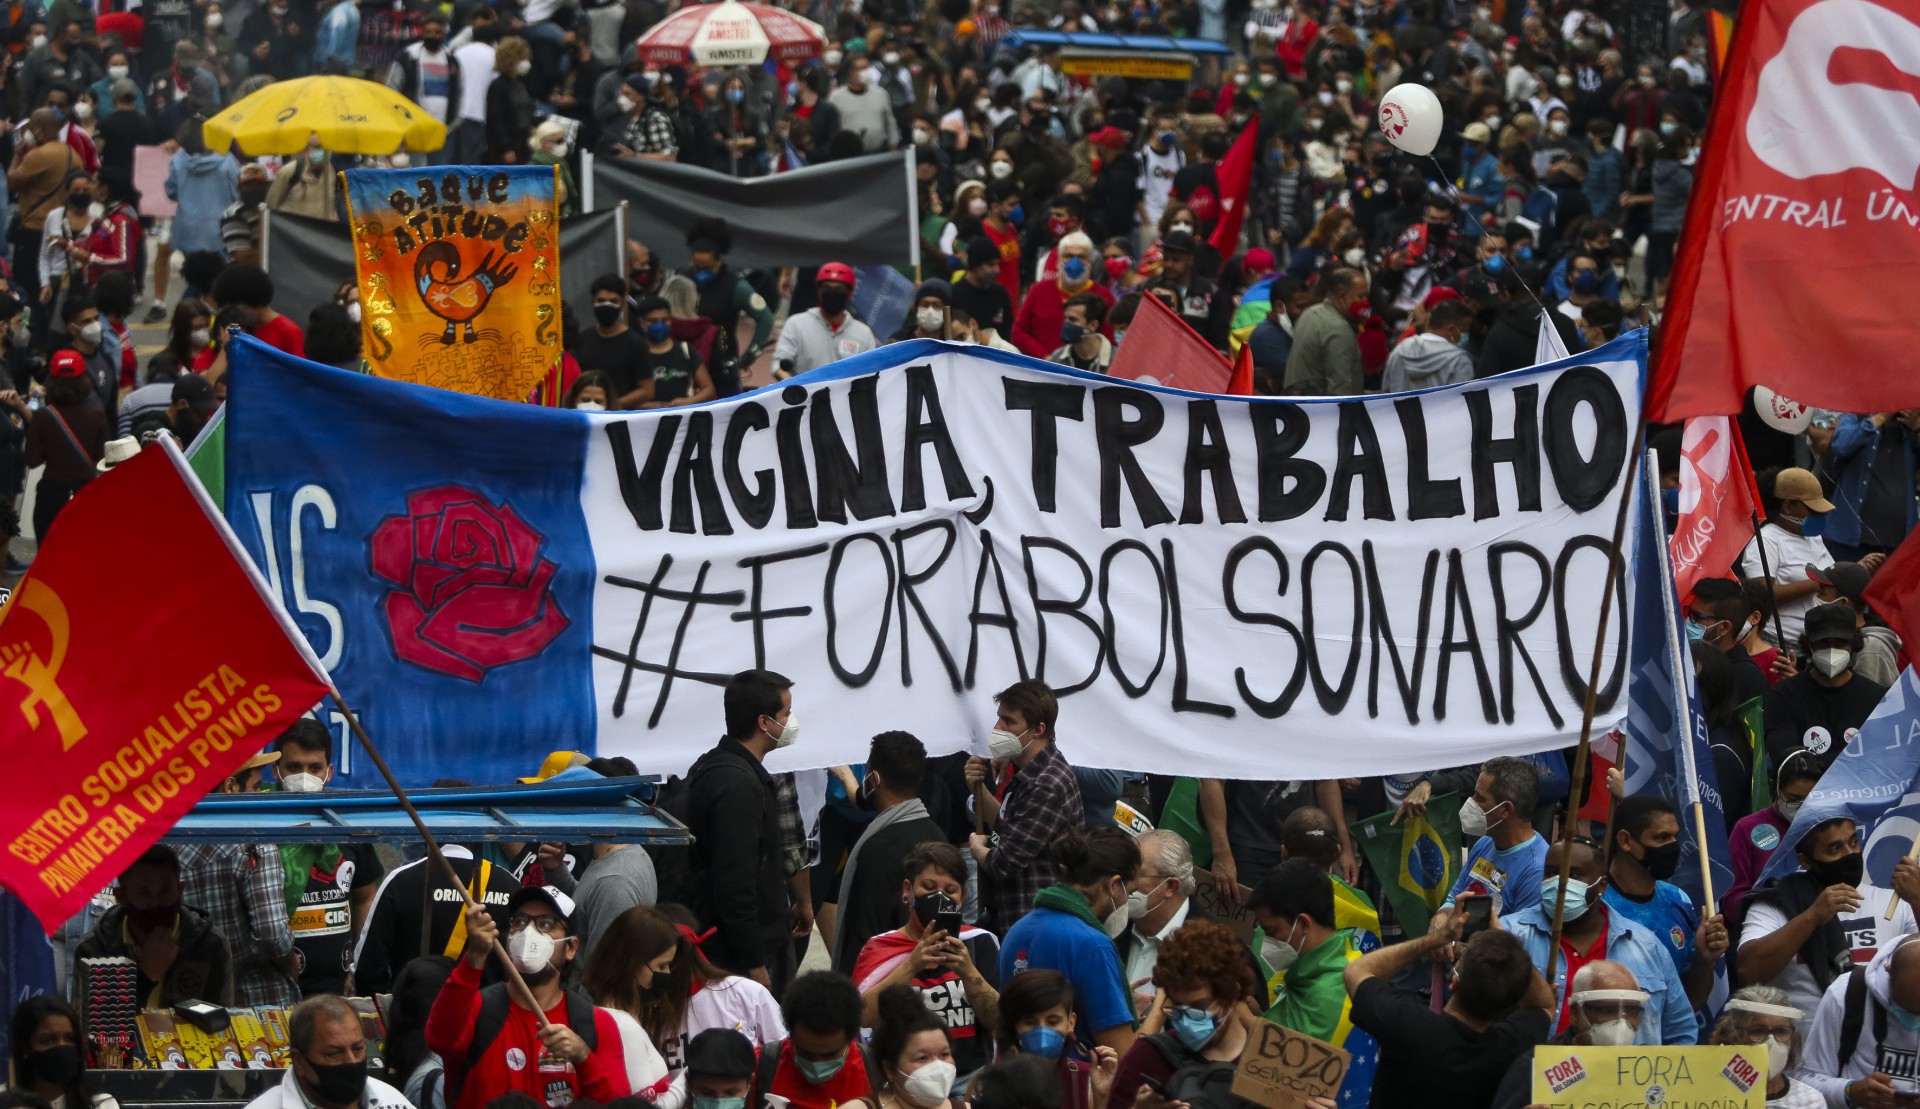 Members of opposition parties and social movements participate in a protest against Brazilian President Jair Bolsonaro's handling of the Covid-19 pandemic in Sao Paulo, Brazil on June 19, 2021. - Far-right President Jair Bolsonaro has been facing criticism for his management of the pandemic, including initially refusing offers of vaccines, as epidemiologists warn Brazil may now be on the brink of a third wave of Covid-19. (Photo by Paulo Pinto / AFP)
      Caption (Foto: AFP)